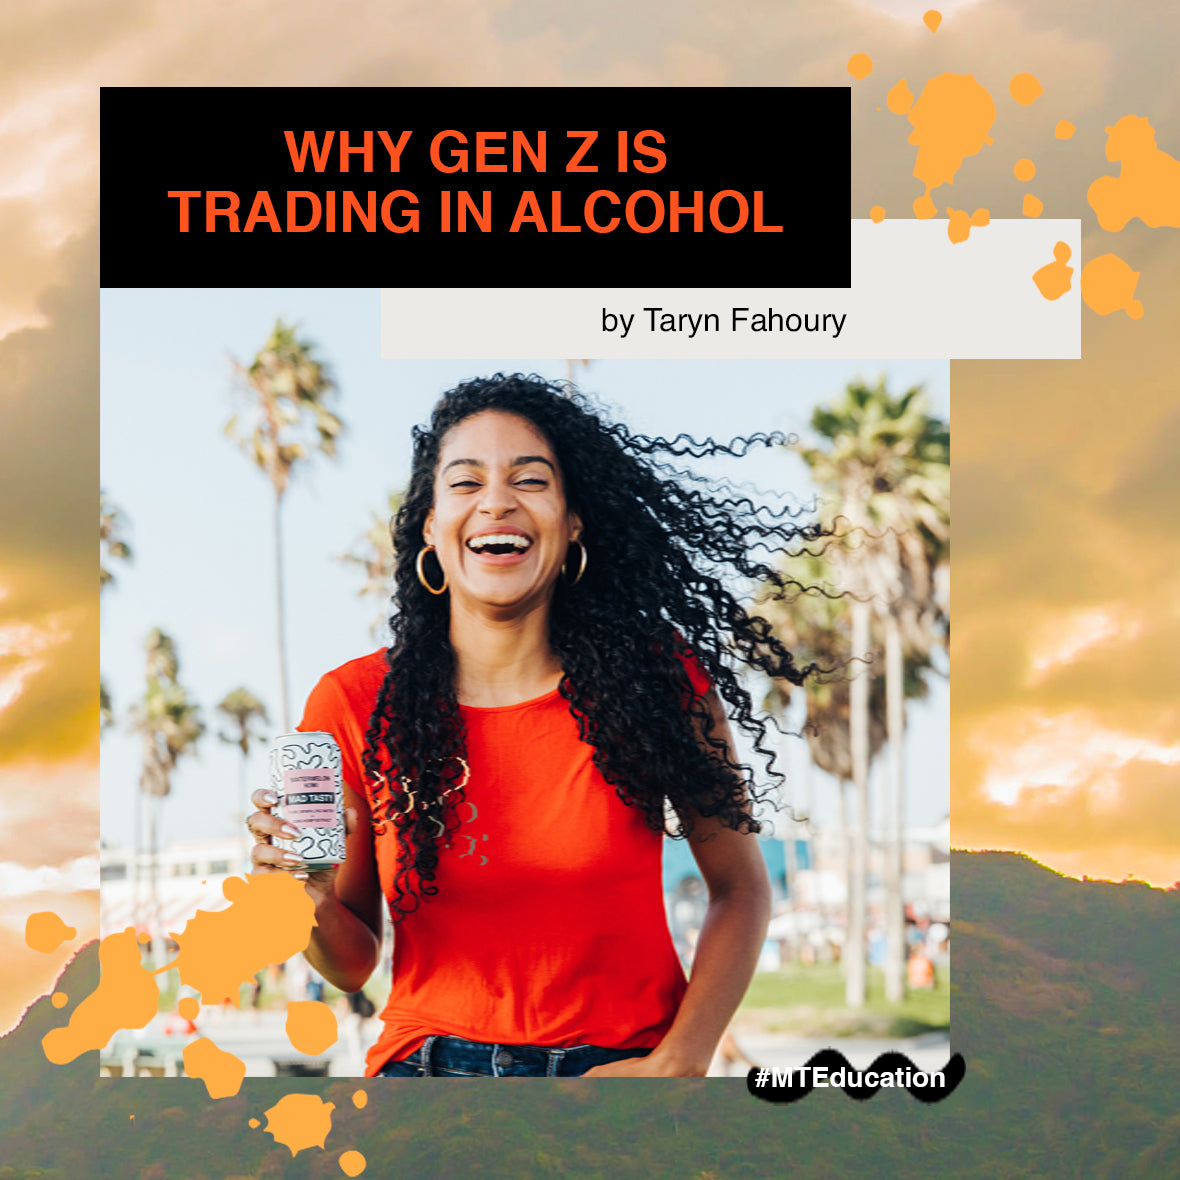 WHY GEN Z IS TRADING IN ALCOHOL FOR CBD